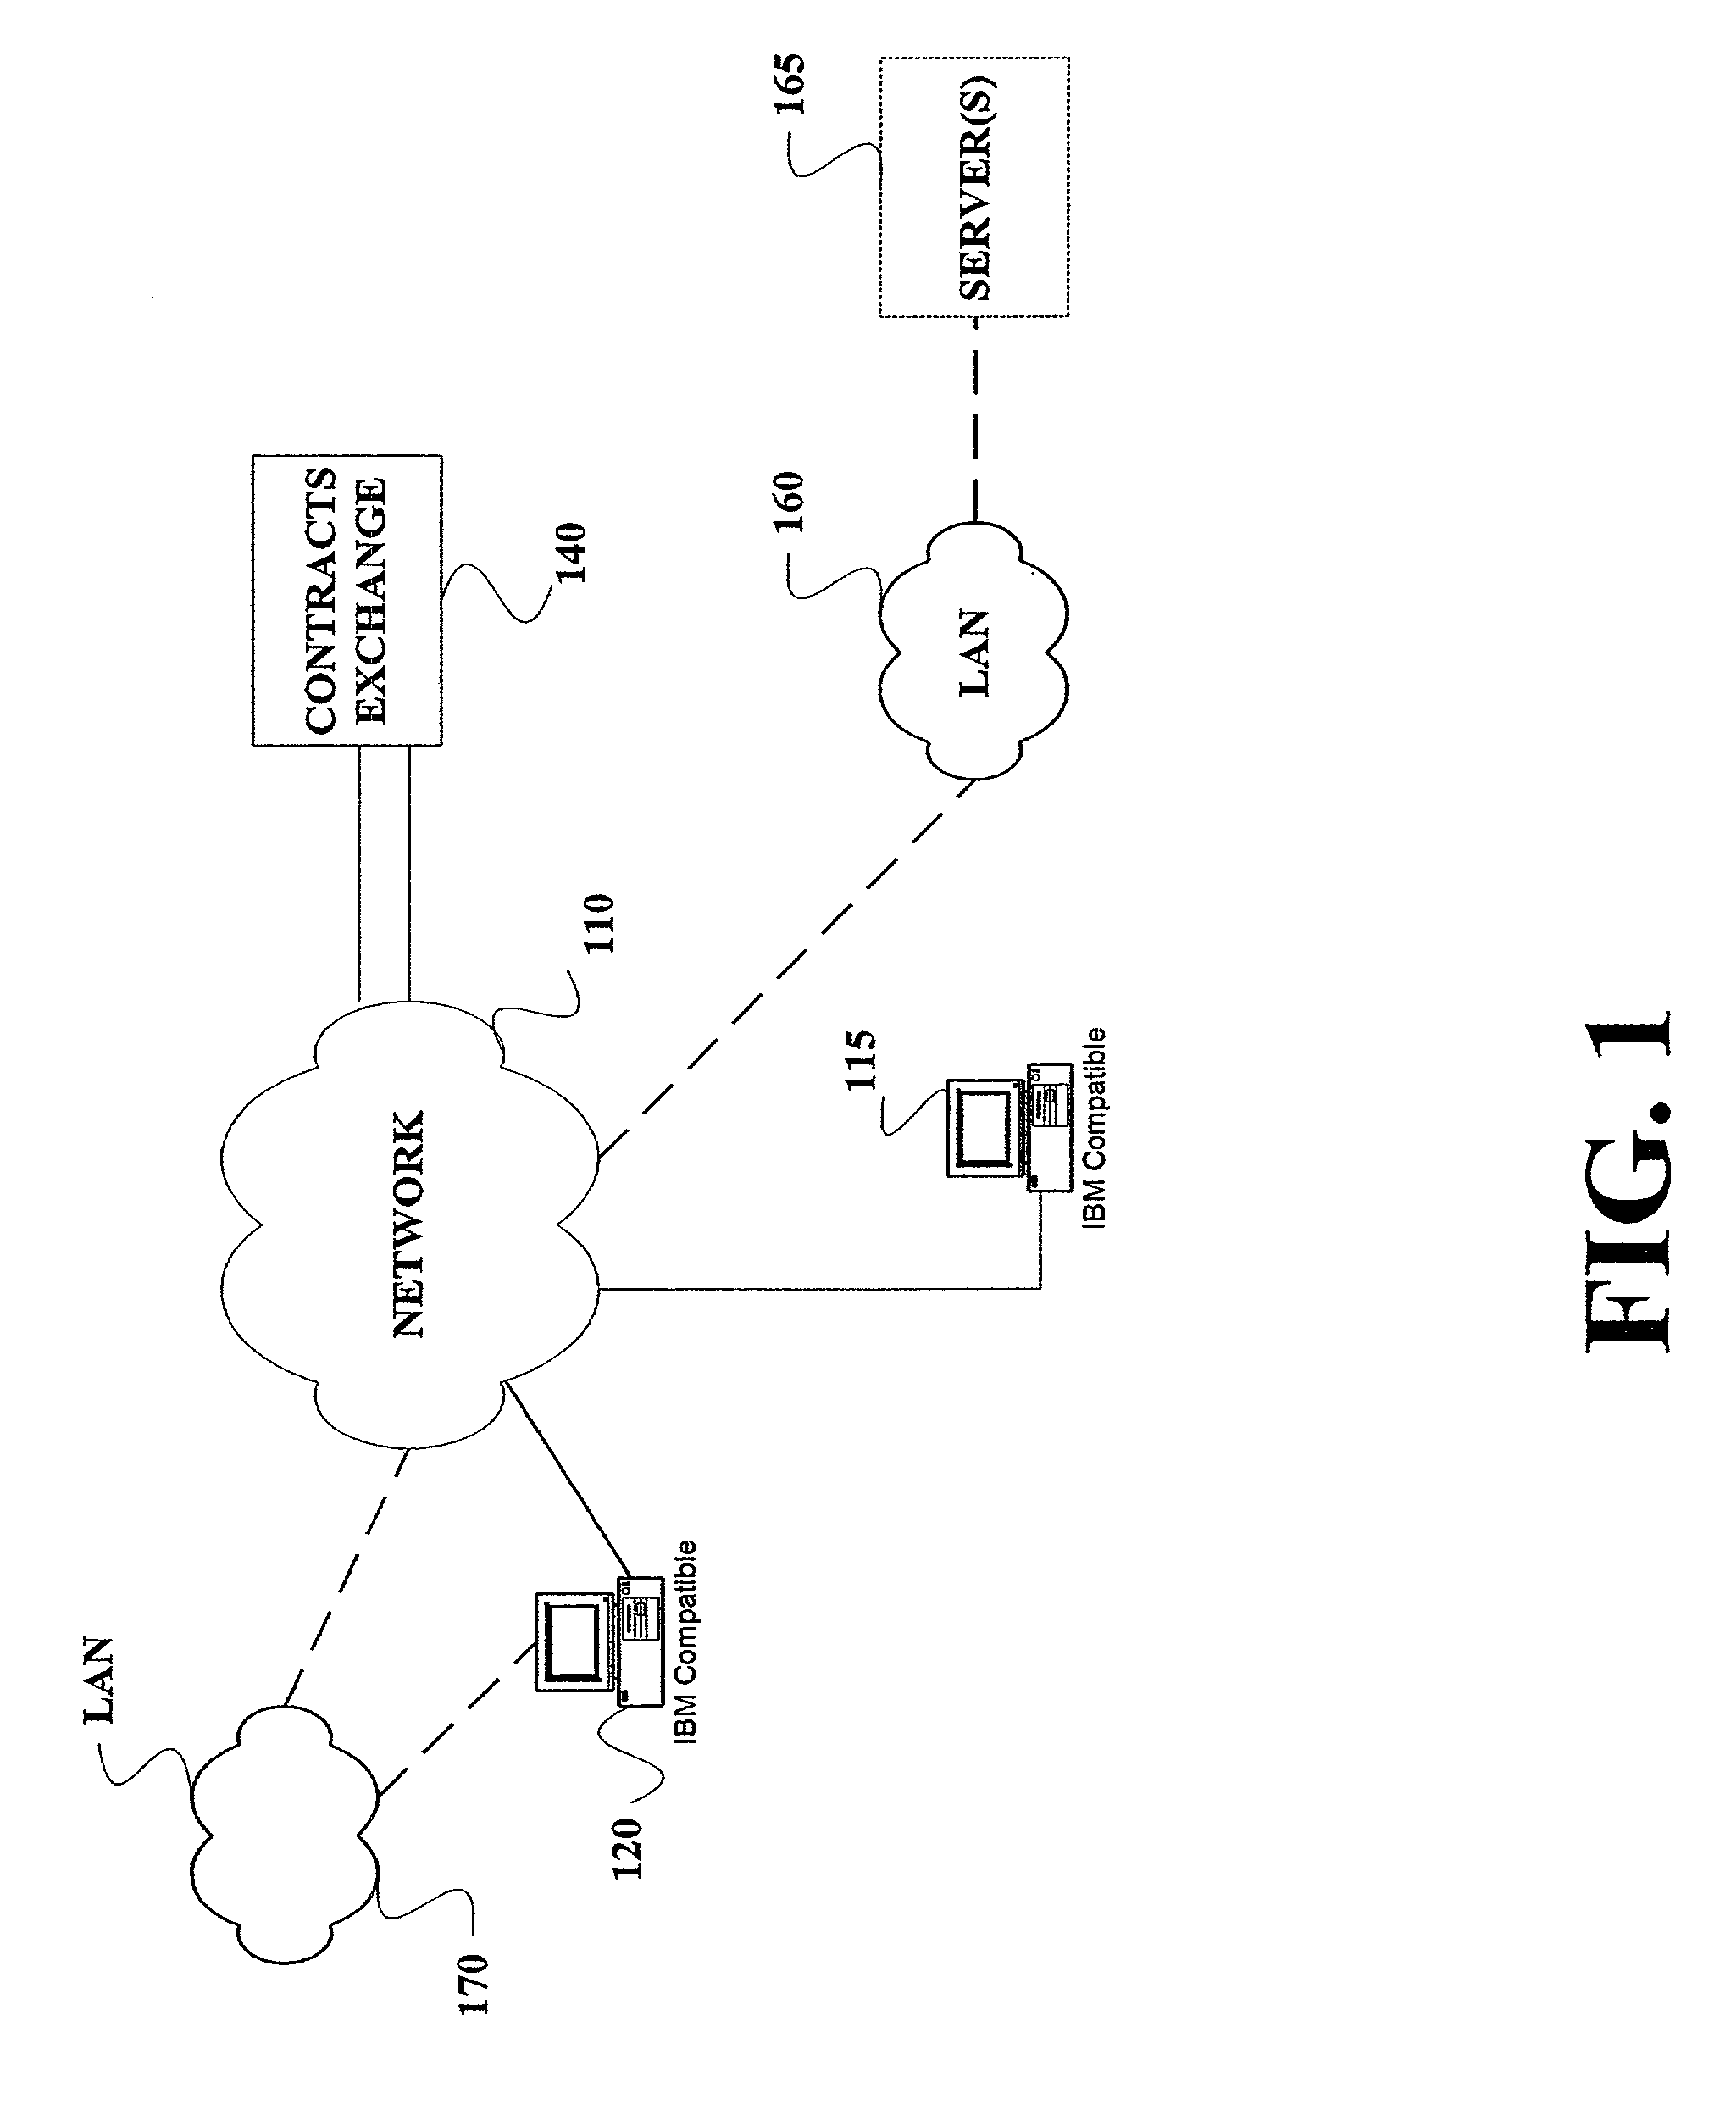 Method and apparatus for electronic negotiation of document content